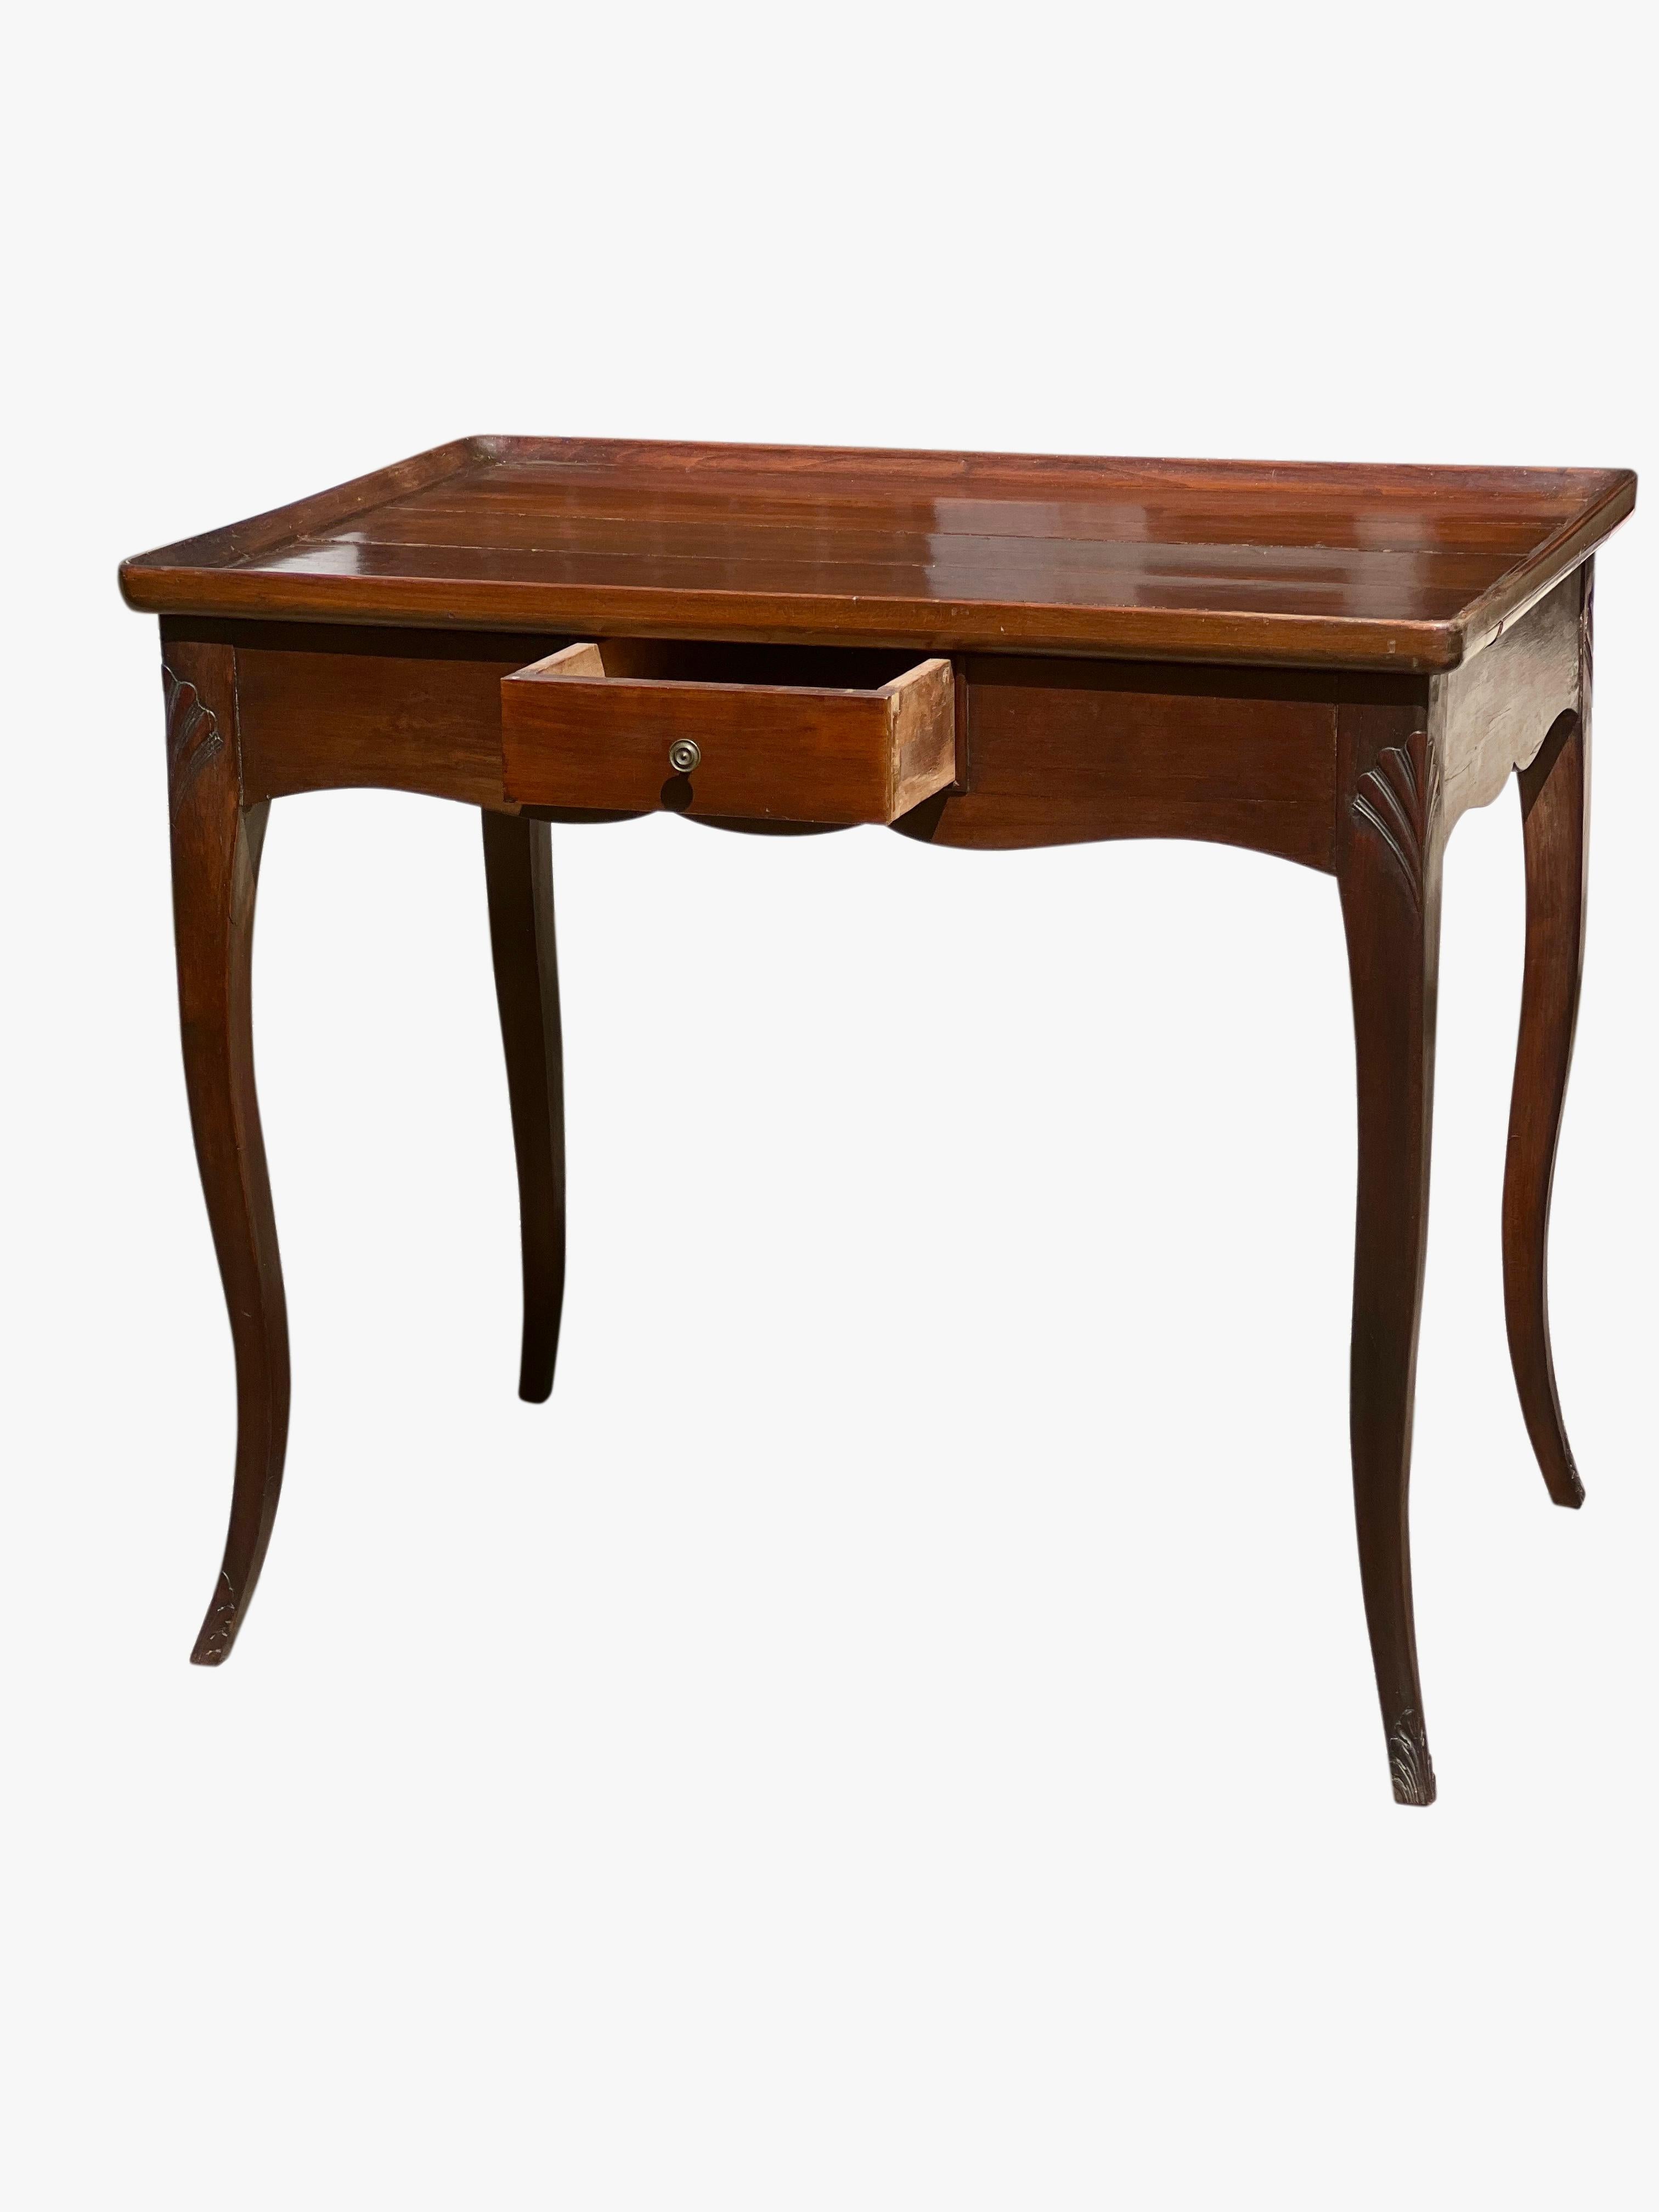 Antique French Provincial mahogany Louis XV style side or  tea table, circa 1900.

This lovely table has been meticulously cared for and has beautiful patina with a gorgeous, satin-like sheen. The slender cabriole legs have a gentle taper with